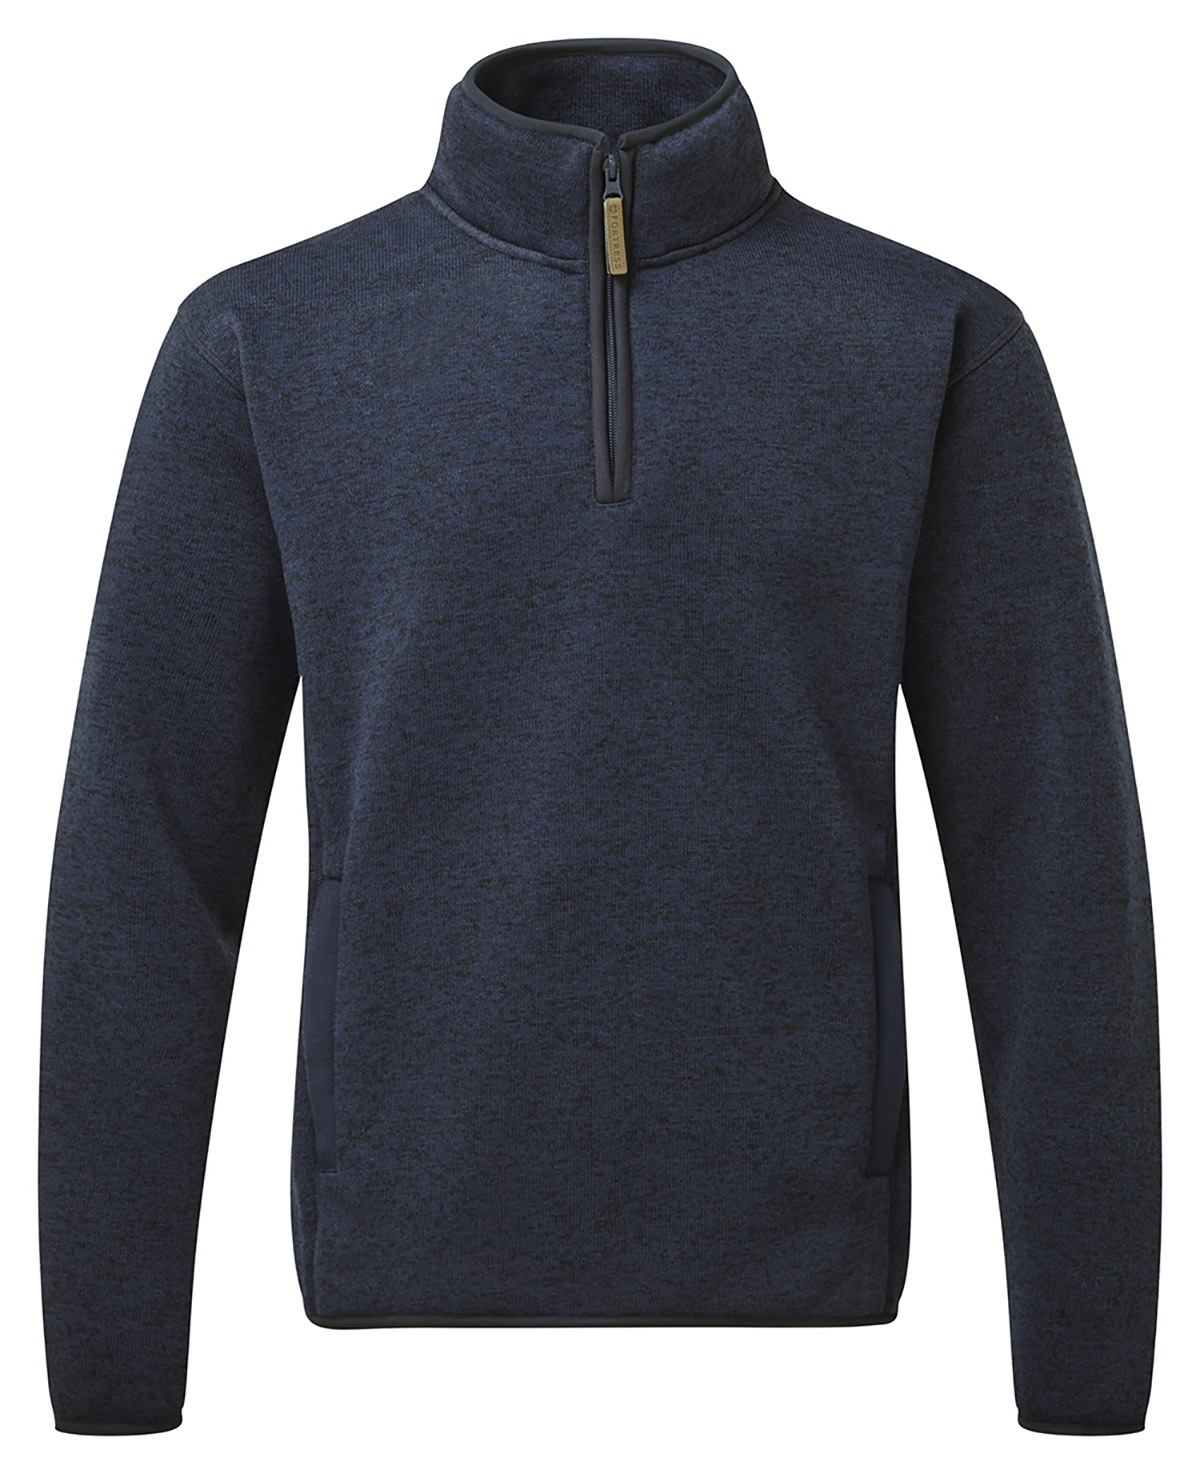 Fortress - Easton Pullover - Sabre Sports Products